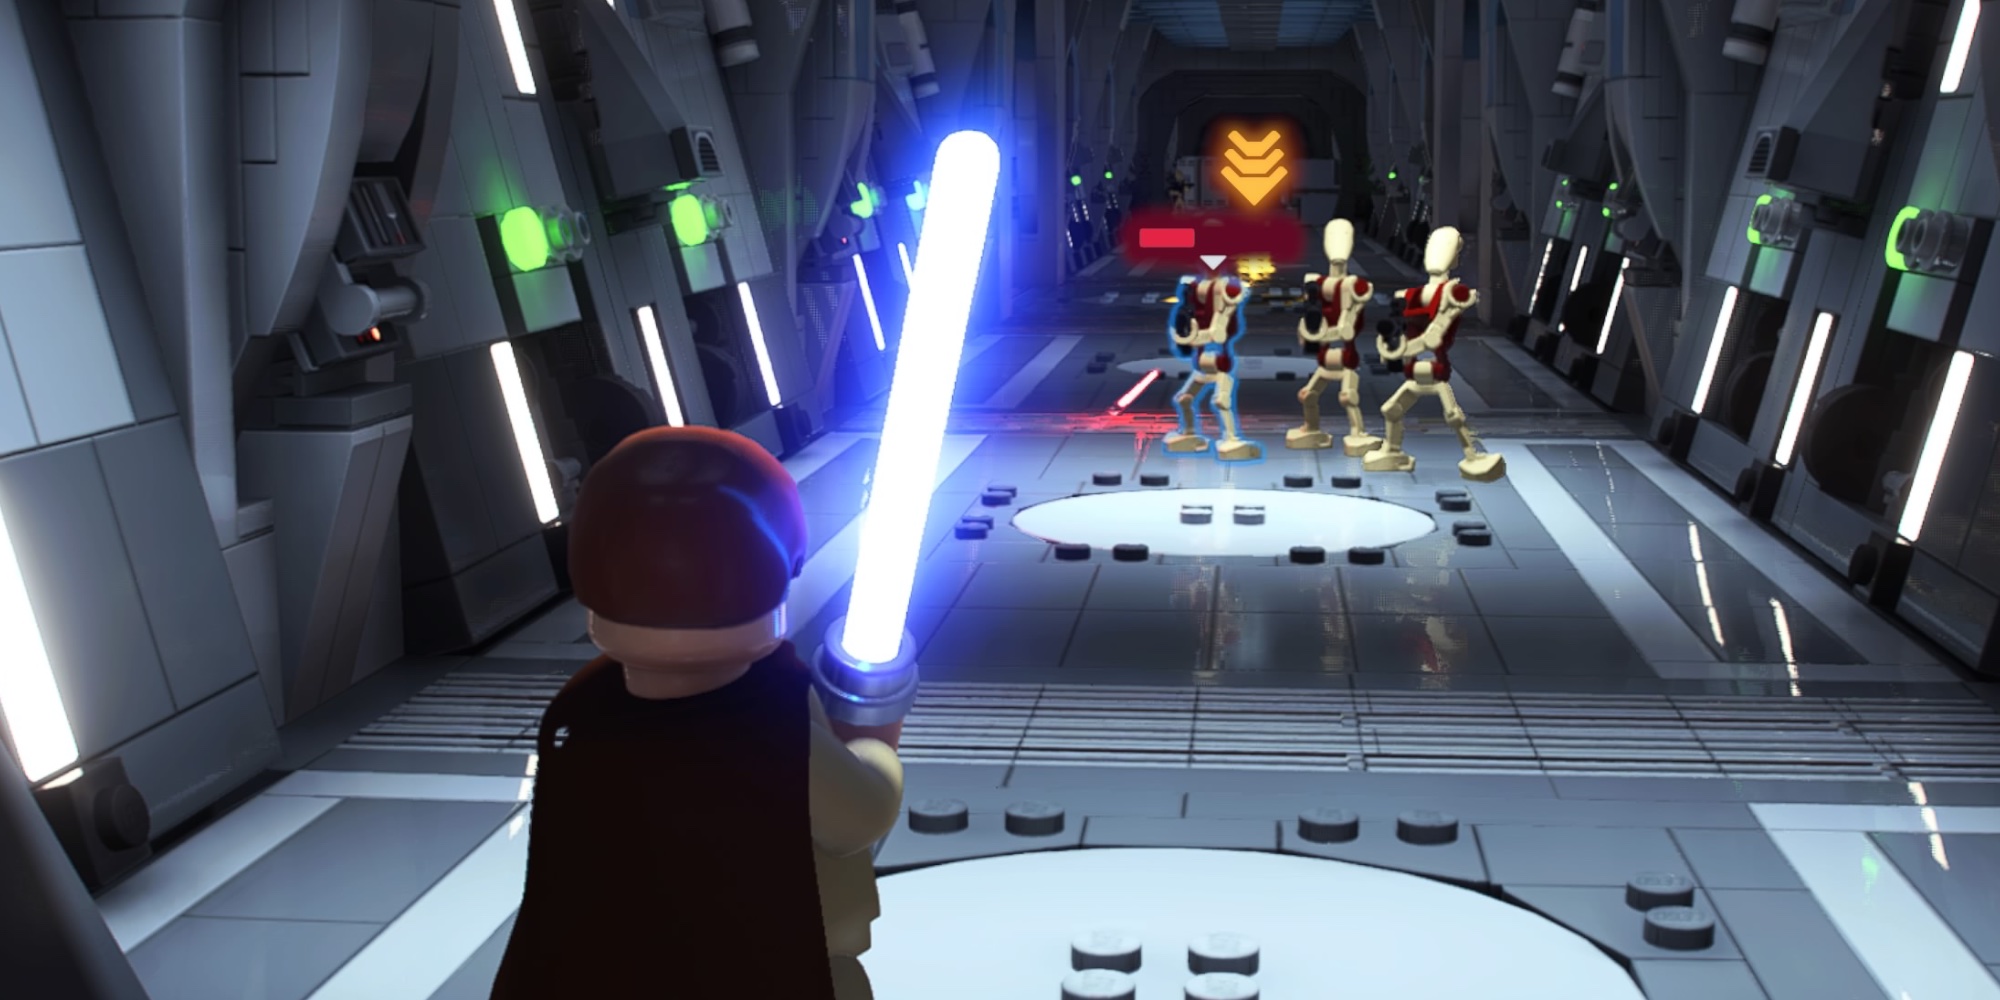 LEGO Star Wars Skywalker Saga hands-on gameplay review - 9to5Toys